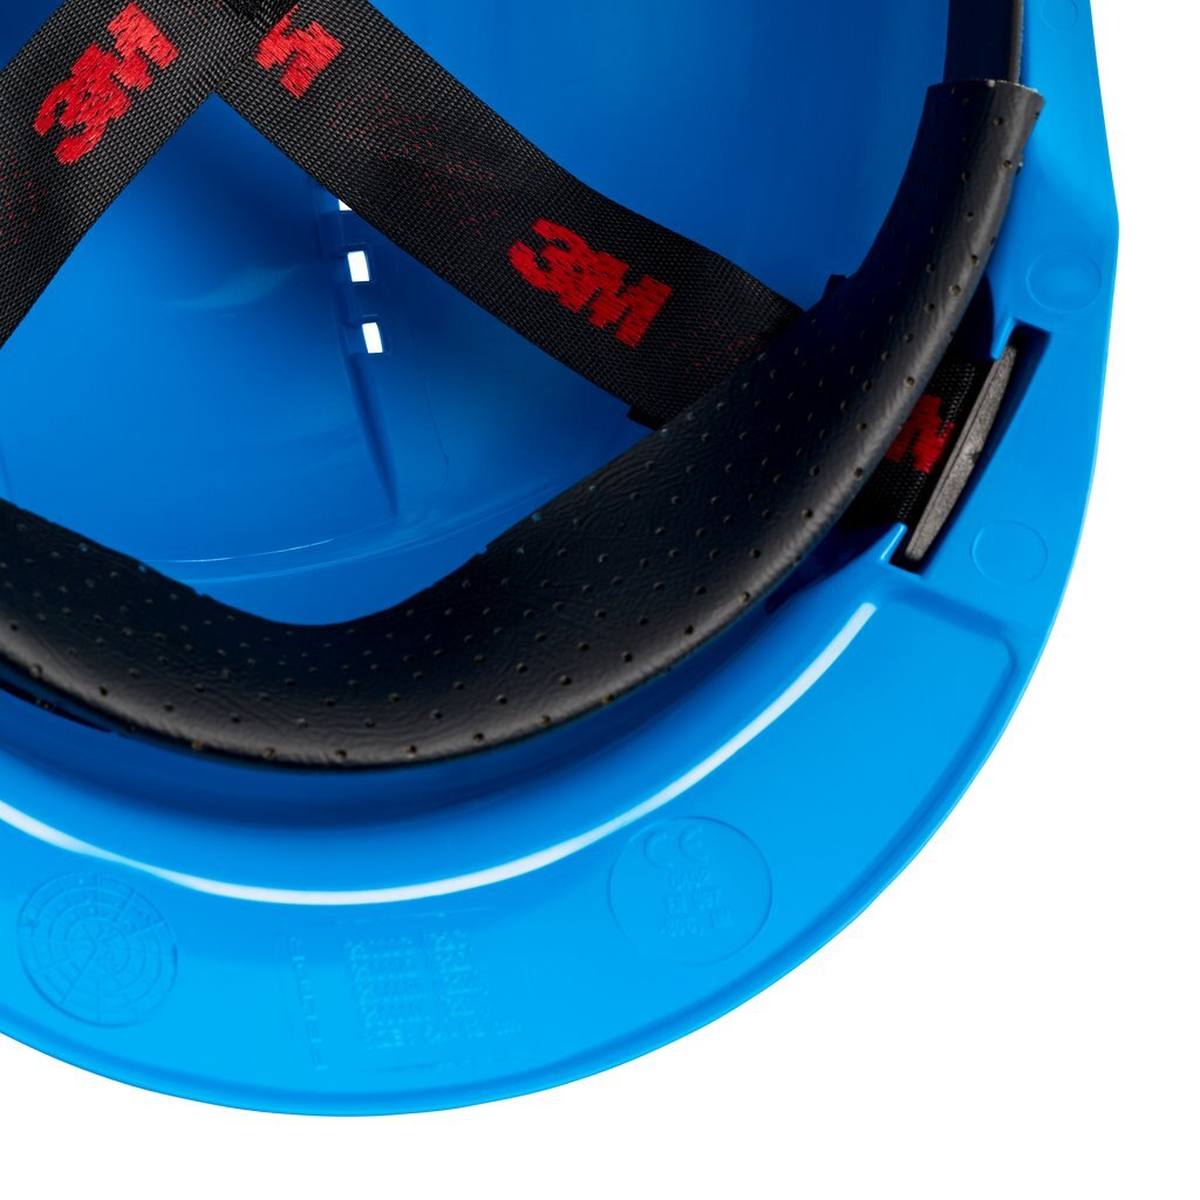 3M G3000 safety helmet G30CUB in blue, ventilated, with uvicator, pinlock and plastic sweatband